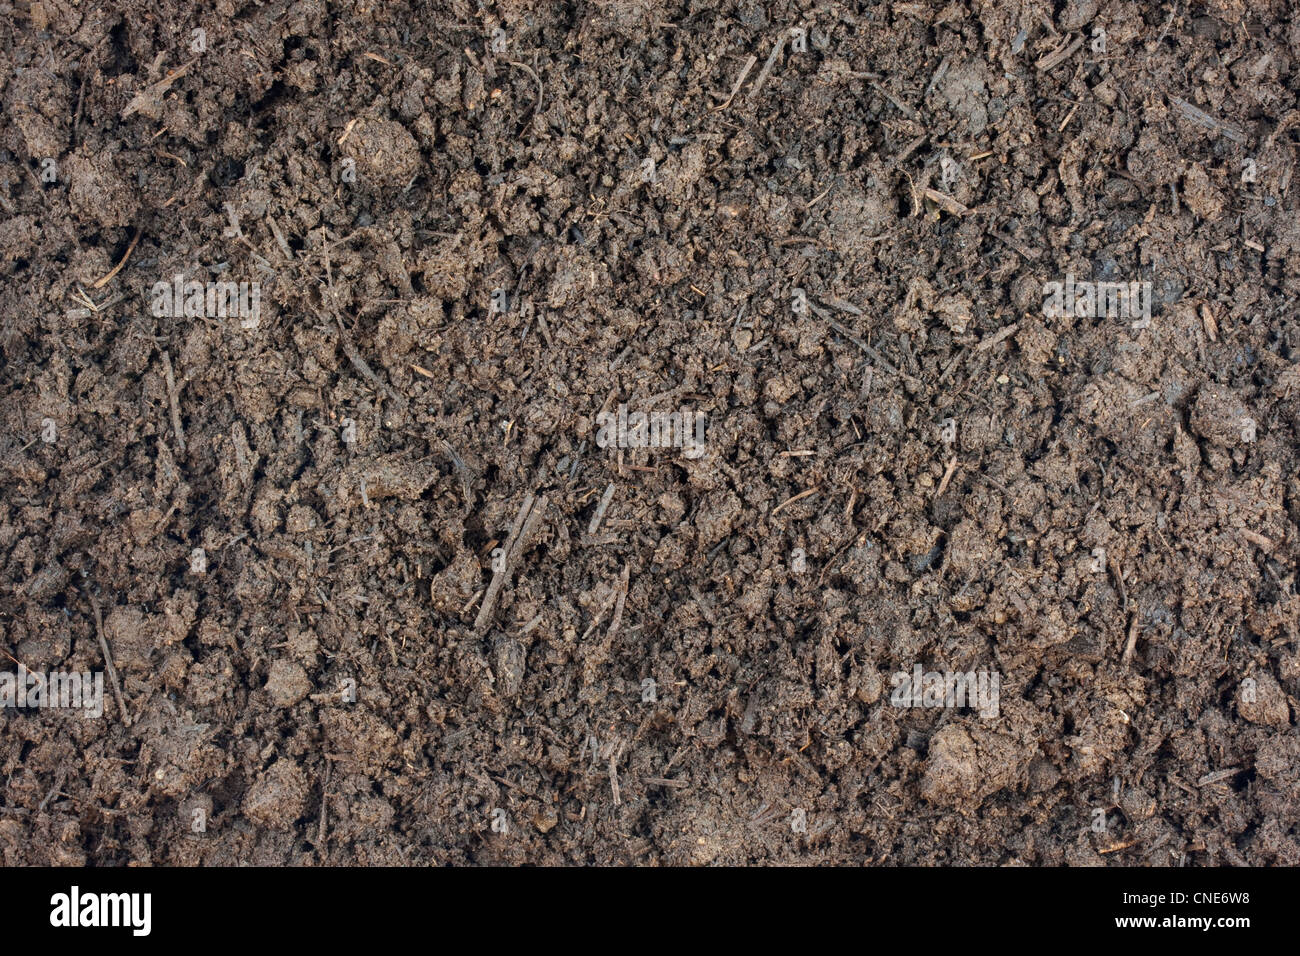 moist steer manure background with compost for gardening Stock Photo